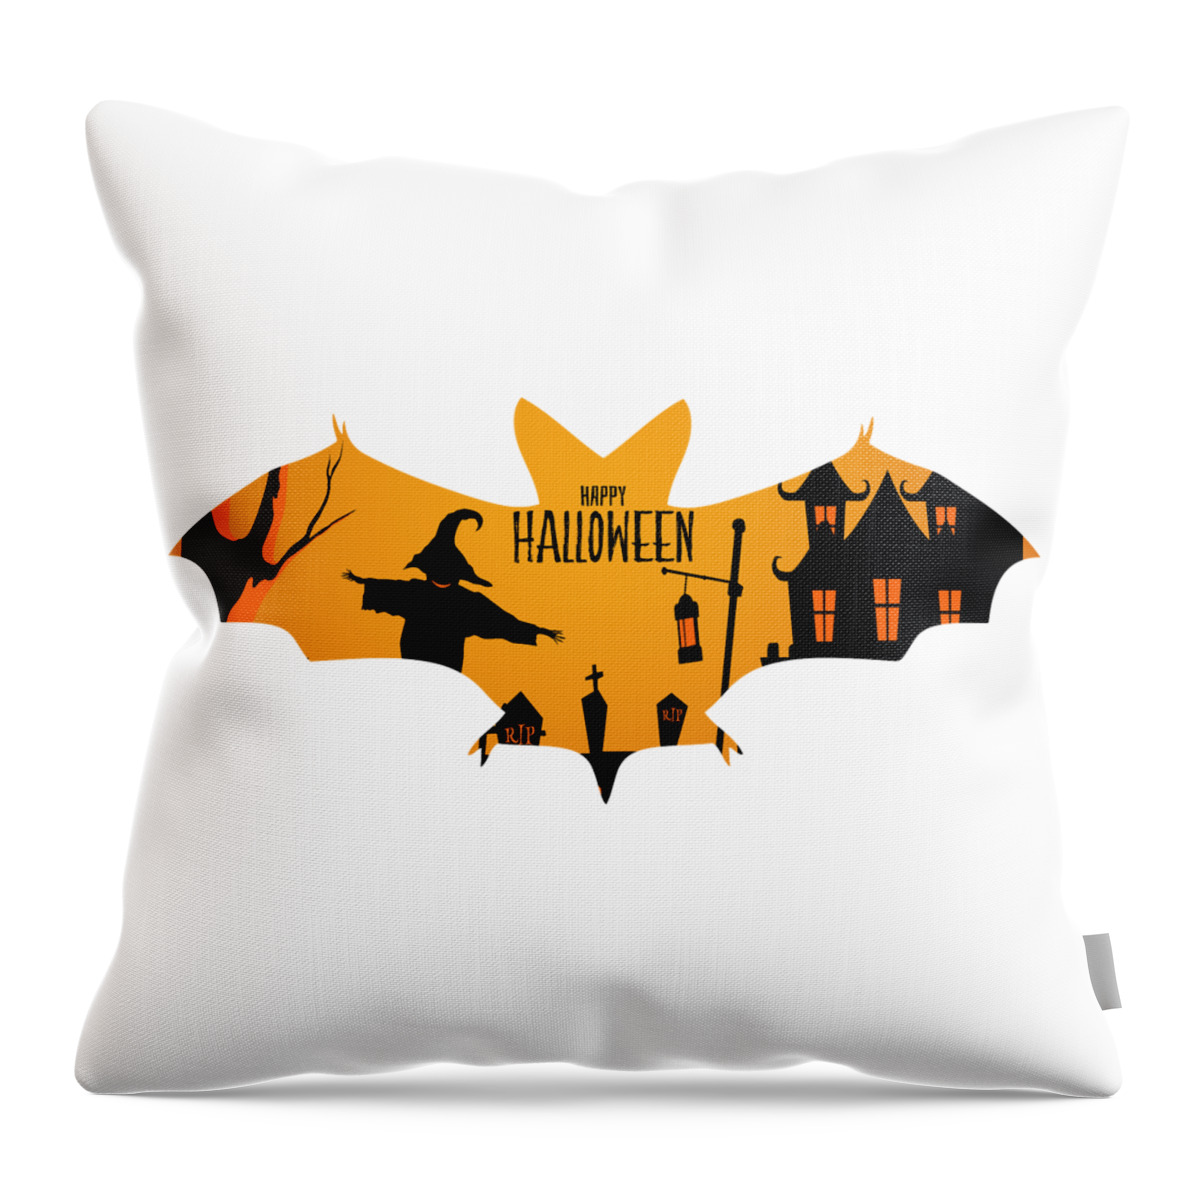 Drawing Throw Pillow featuring the digital art Happy Halloween Isolated Bat Silhouette, Halloween Graphic Design by Mounir Khalfouf